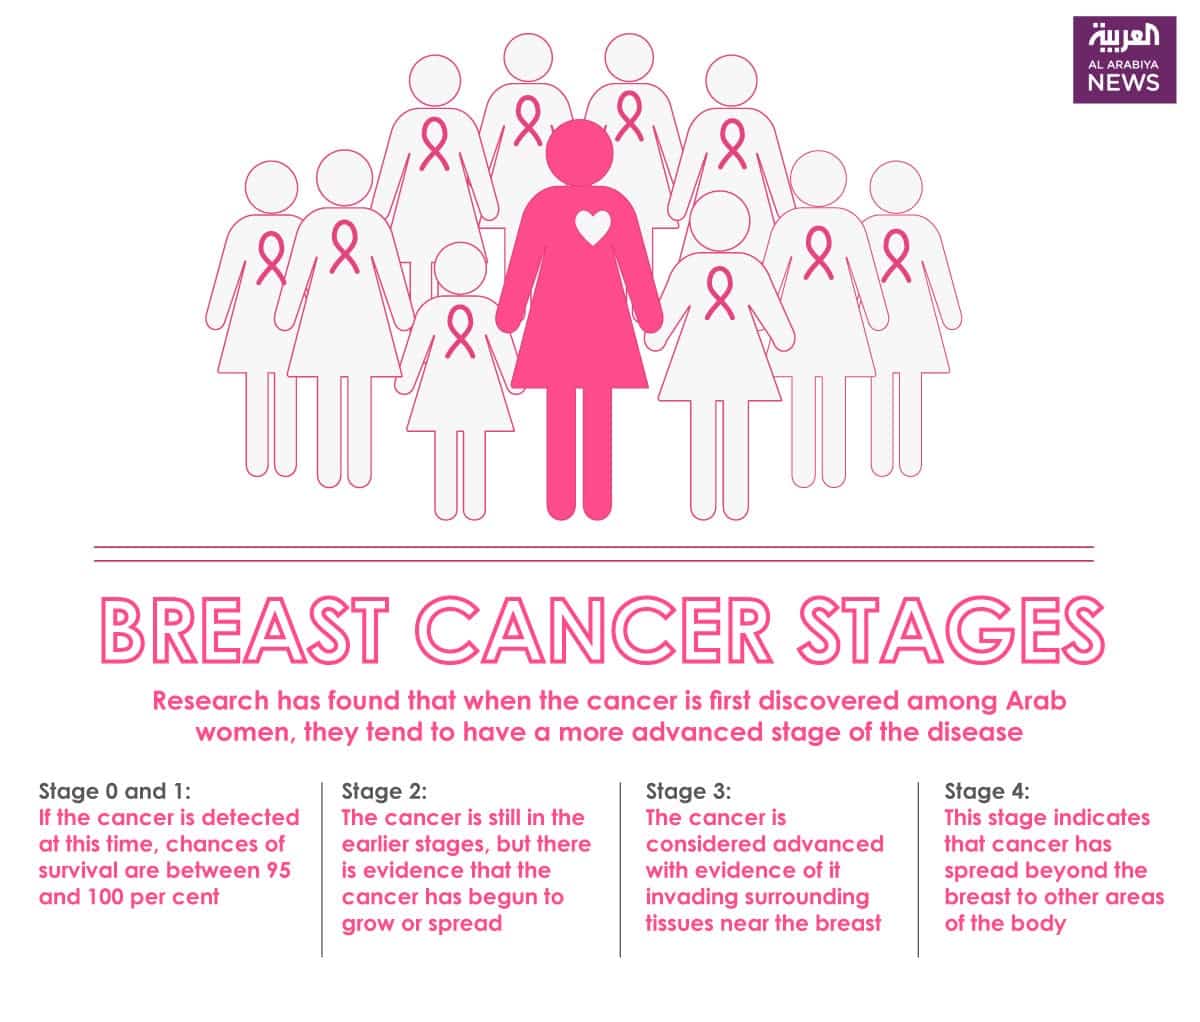 What women in the Arab world should know about breast cancer